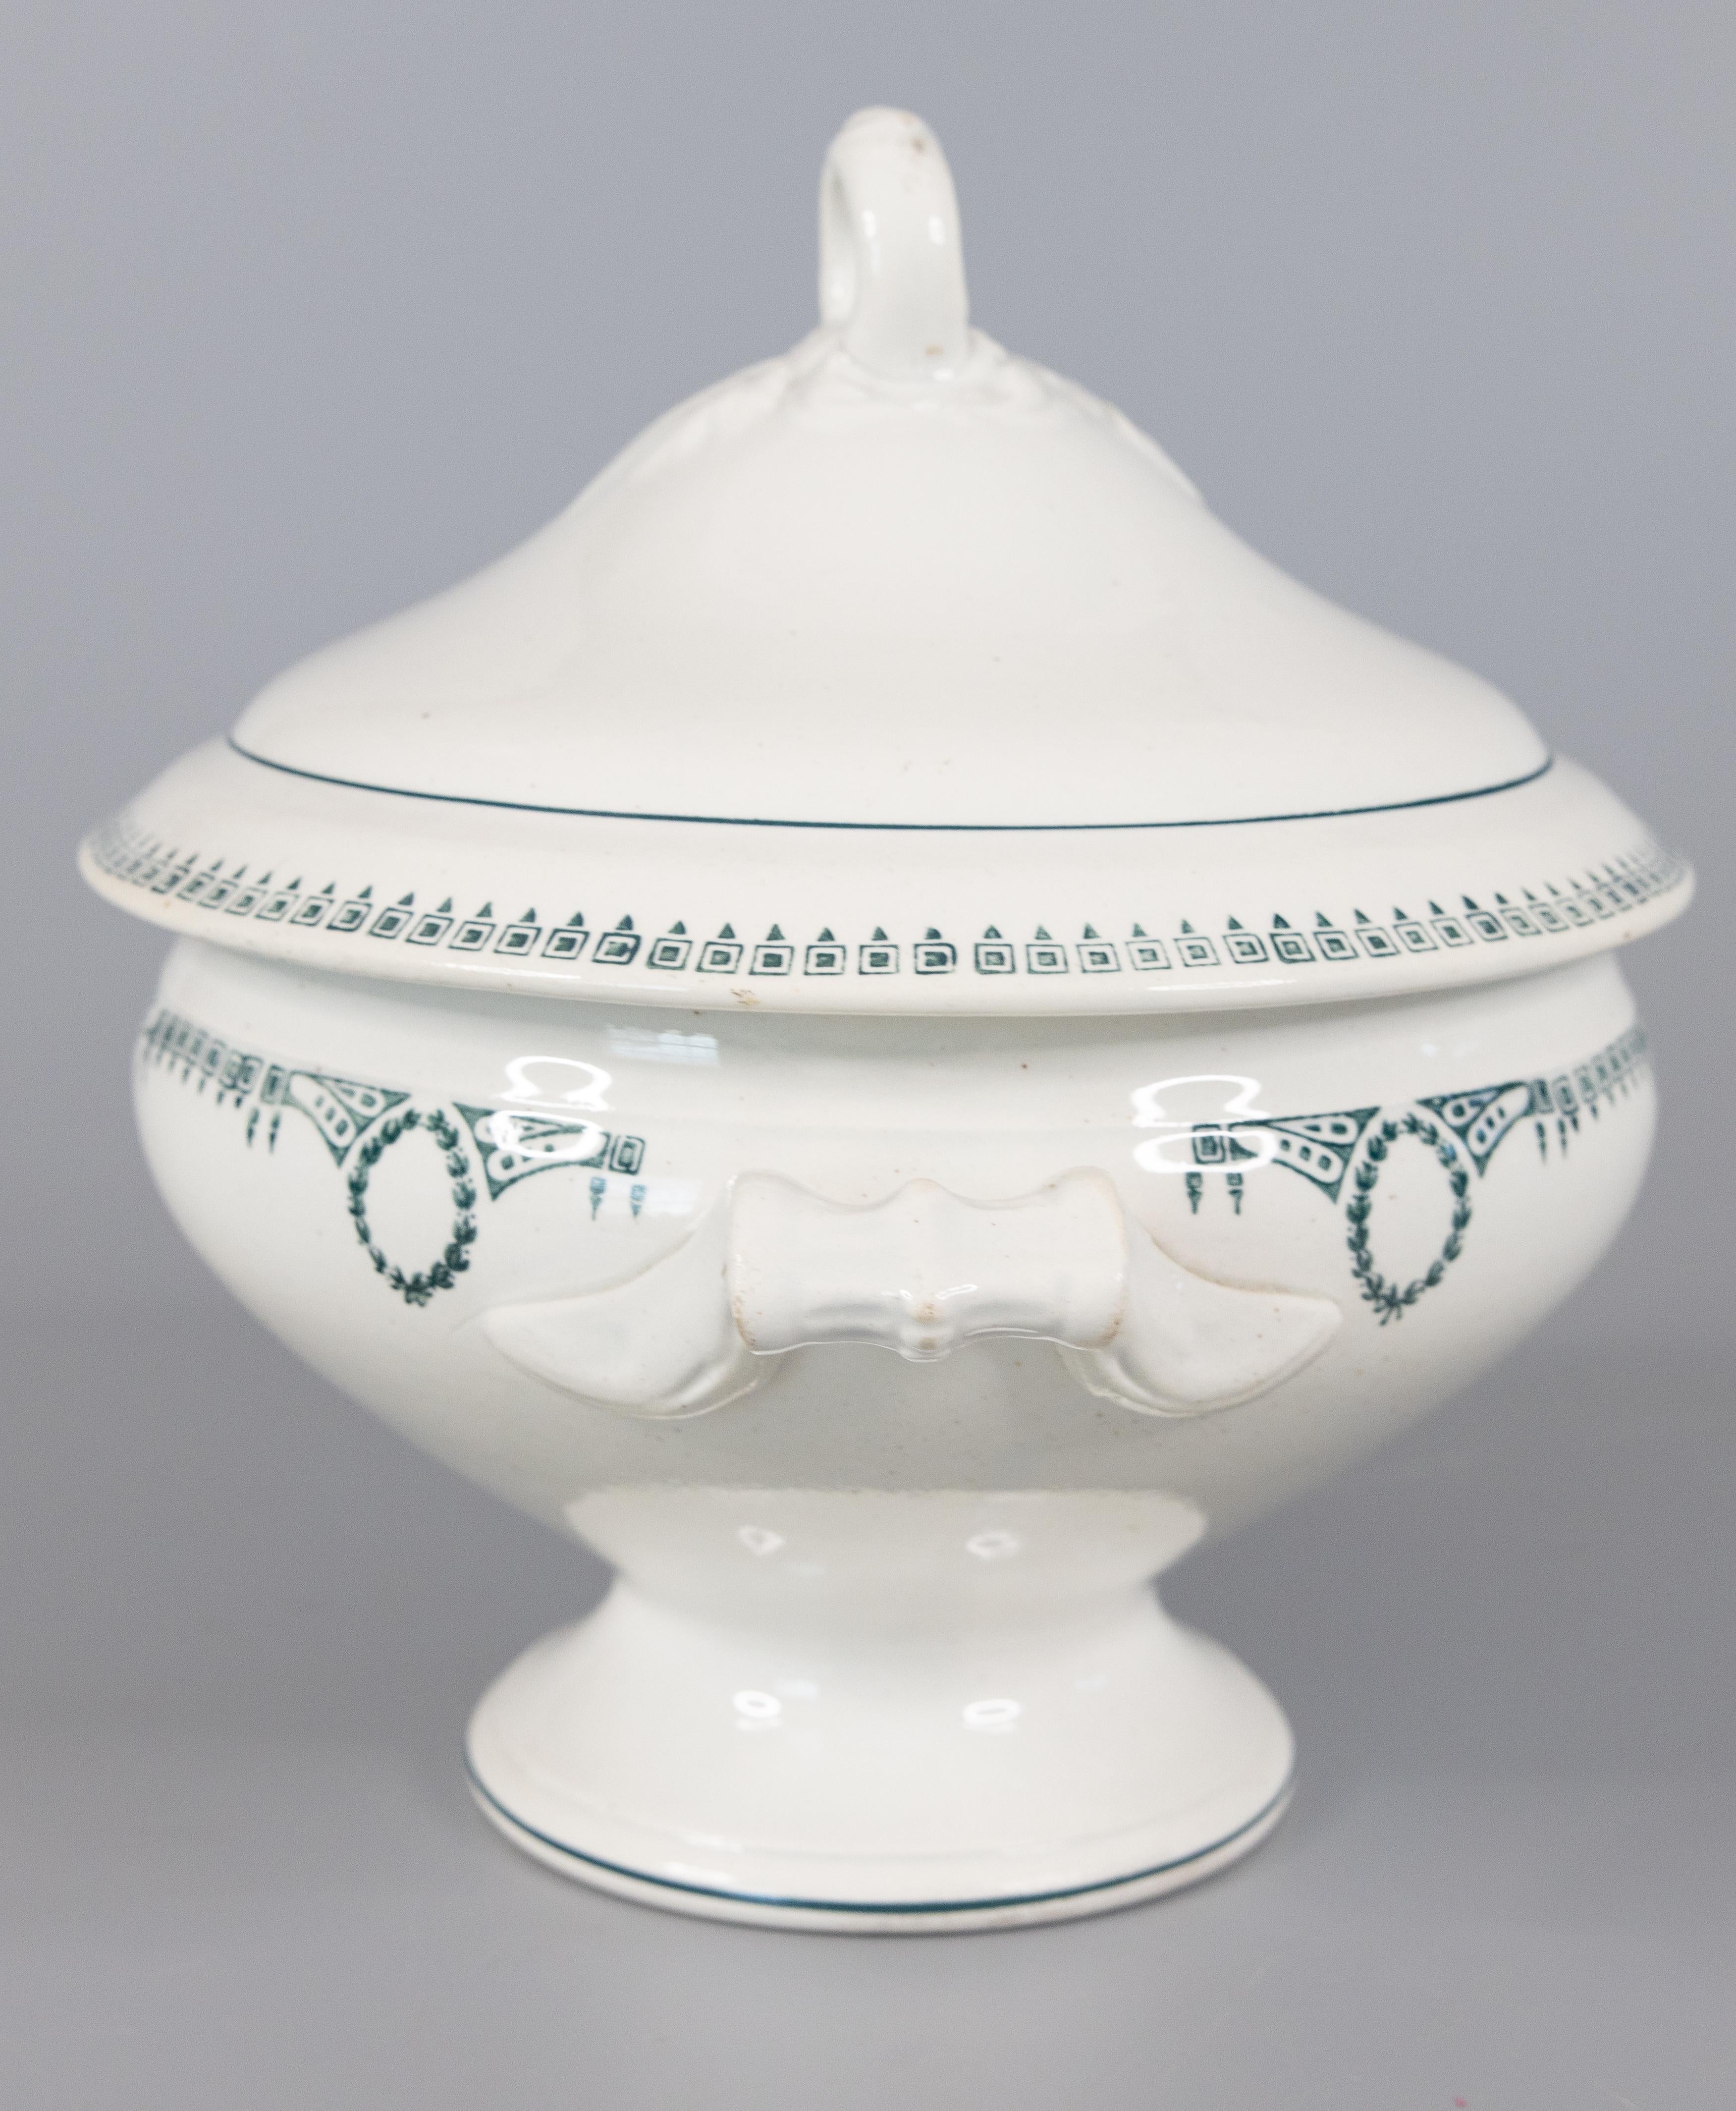 A gorgeous antique white ironstone lidded soupiere made in France by St. Amand, circa 1920. Marked 